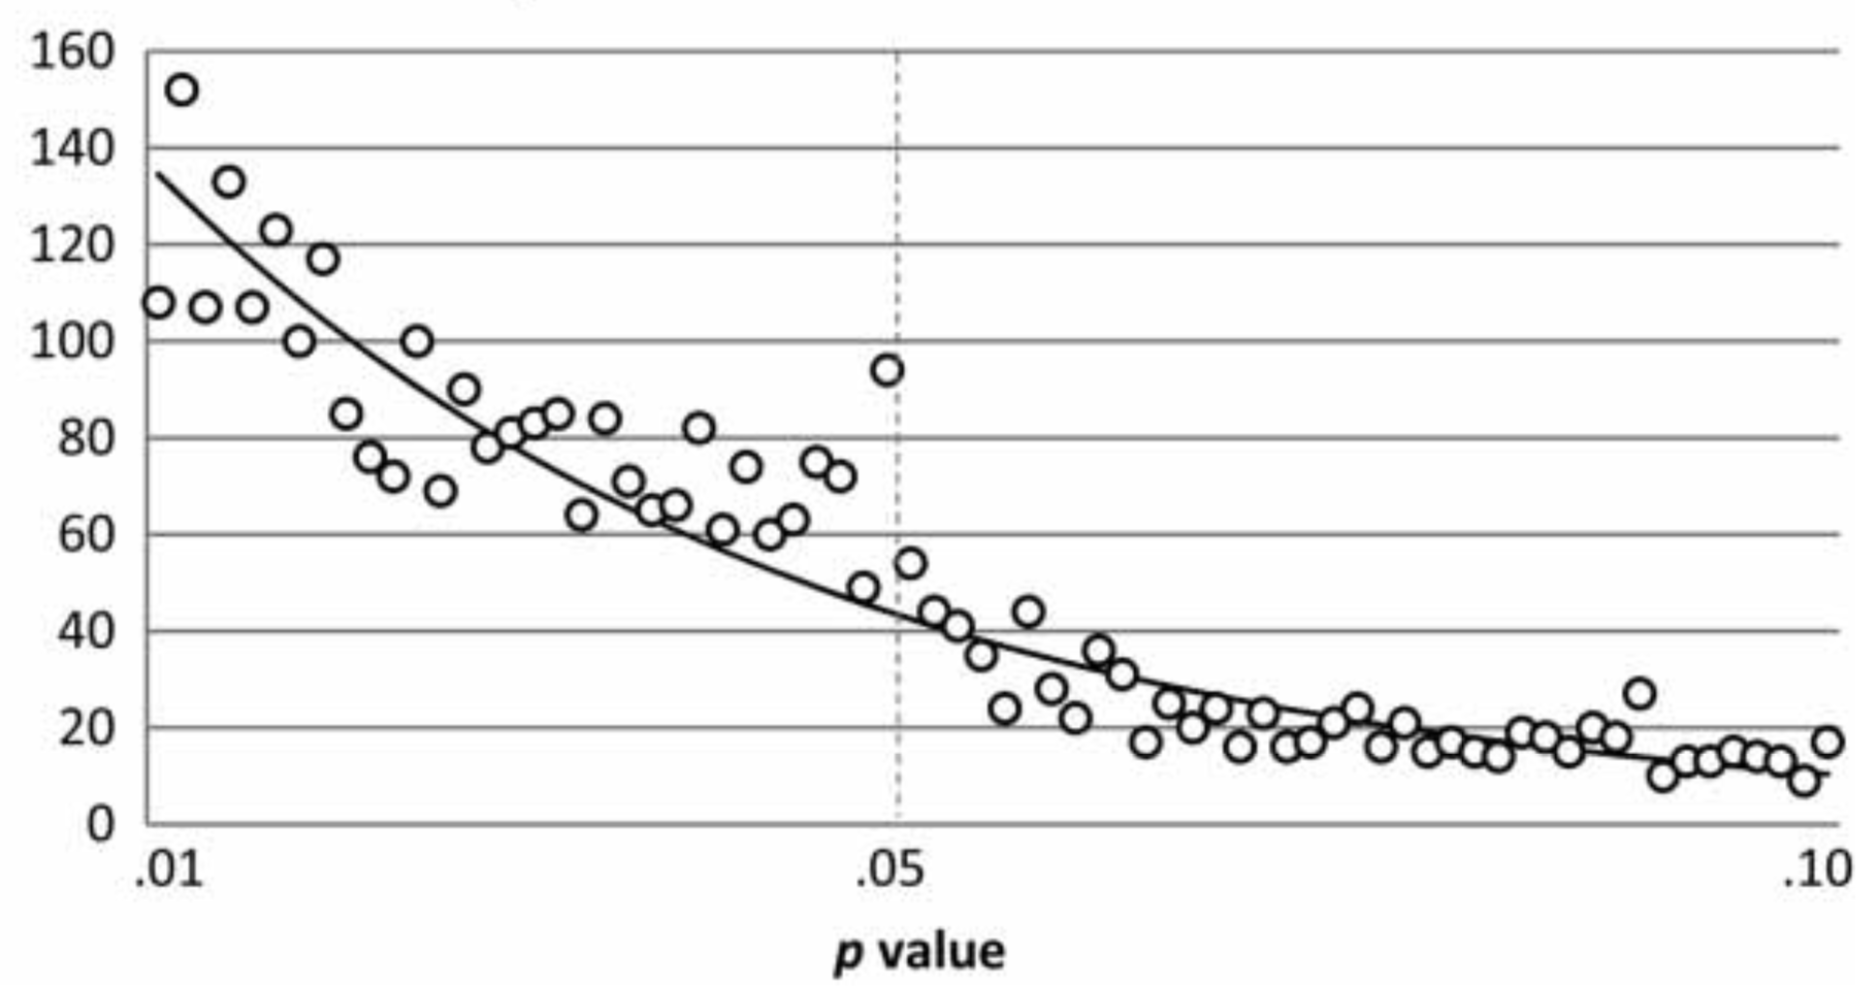 Histogram of published p-values; spike at p=0.05